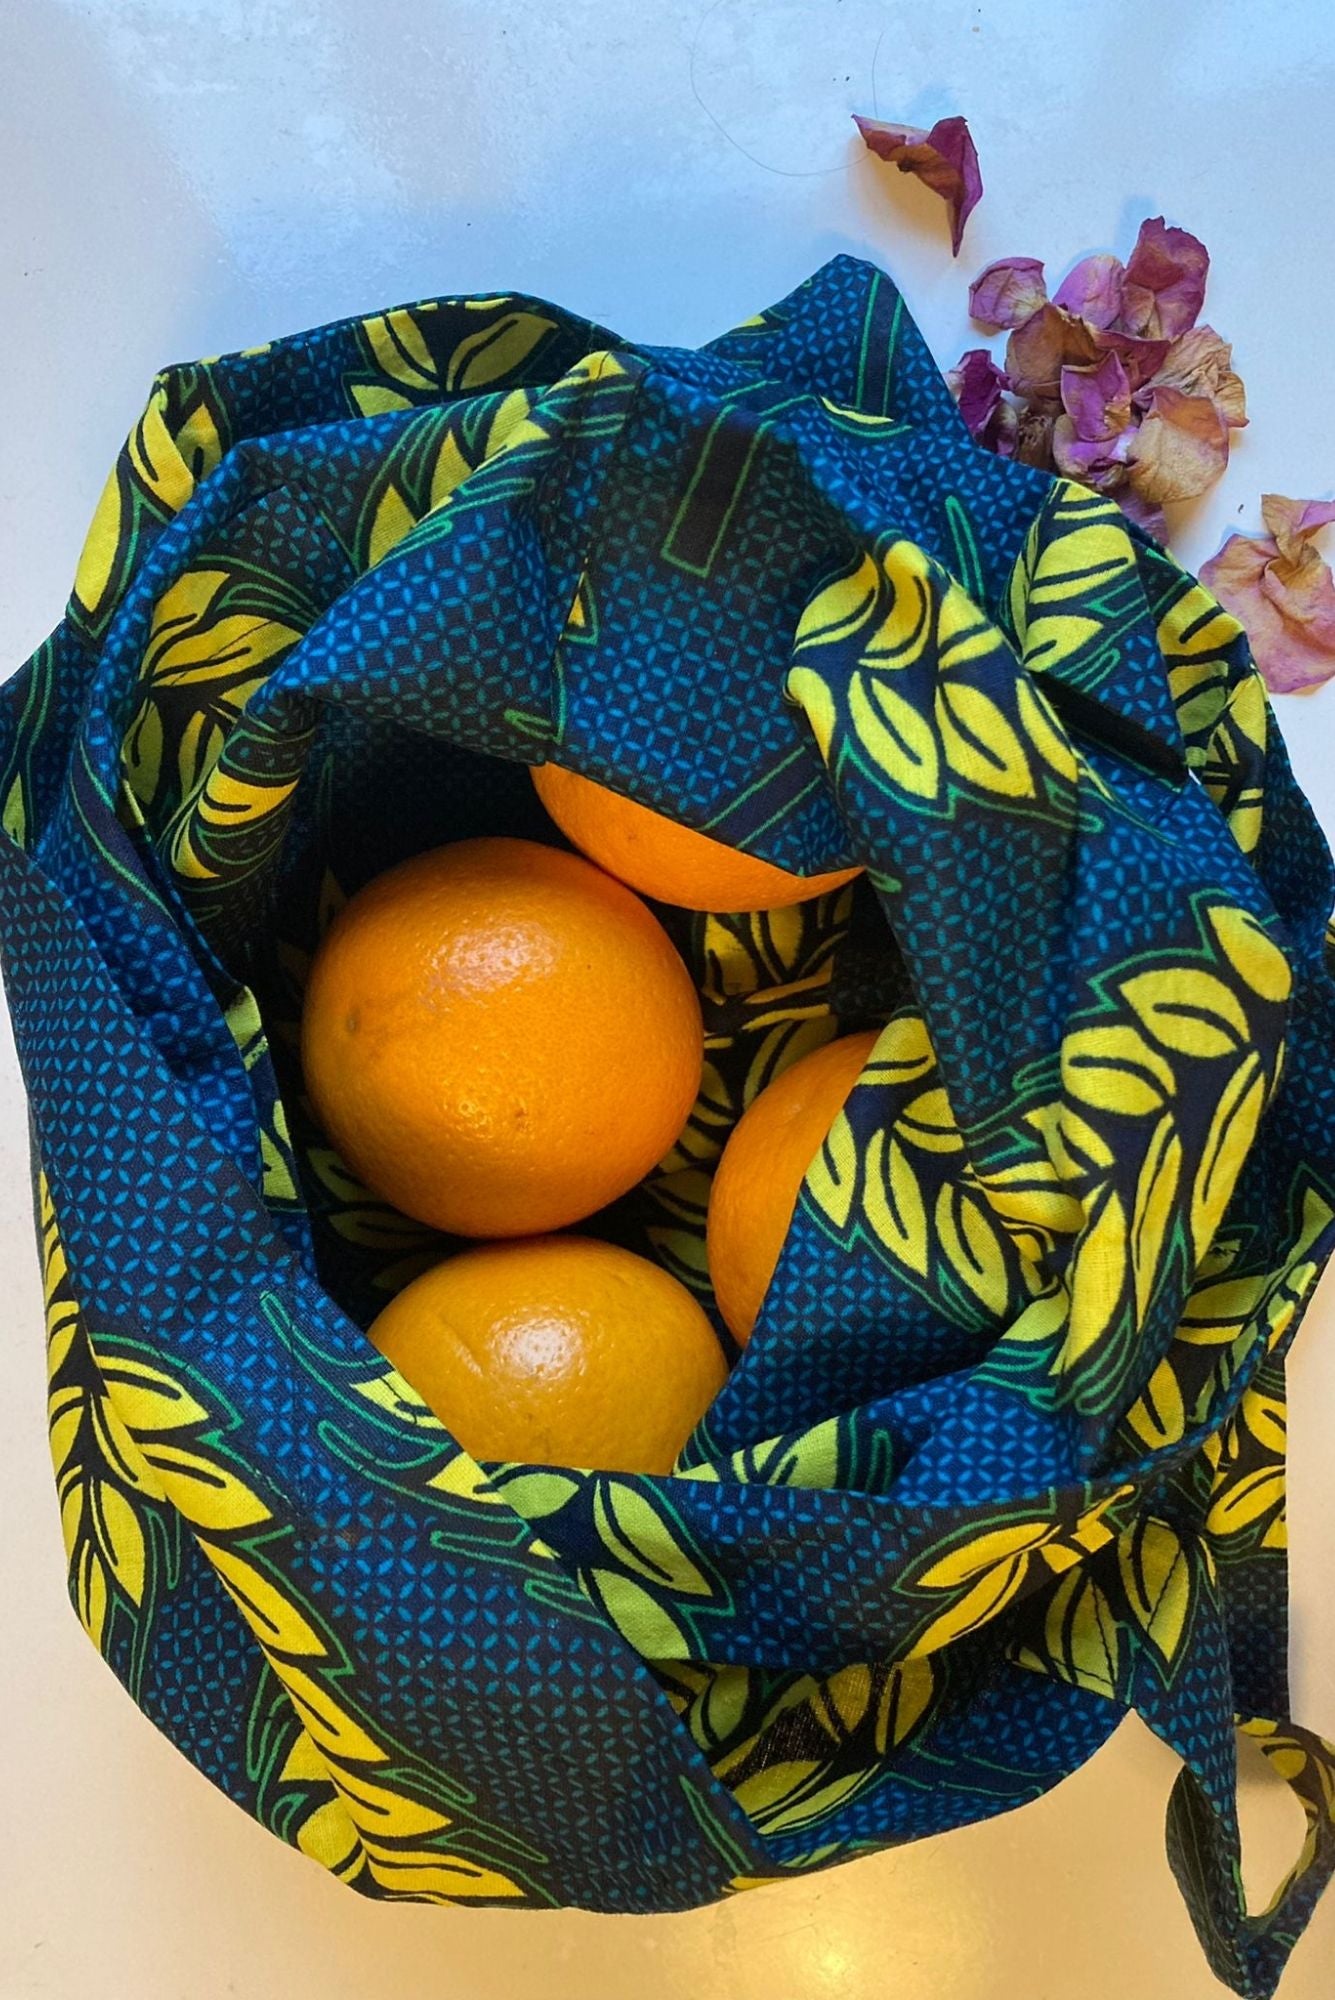 Fabric tote in teal and yellow sprig